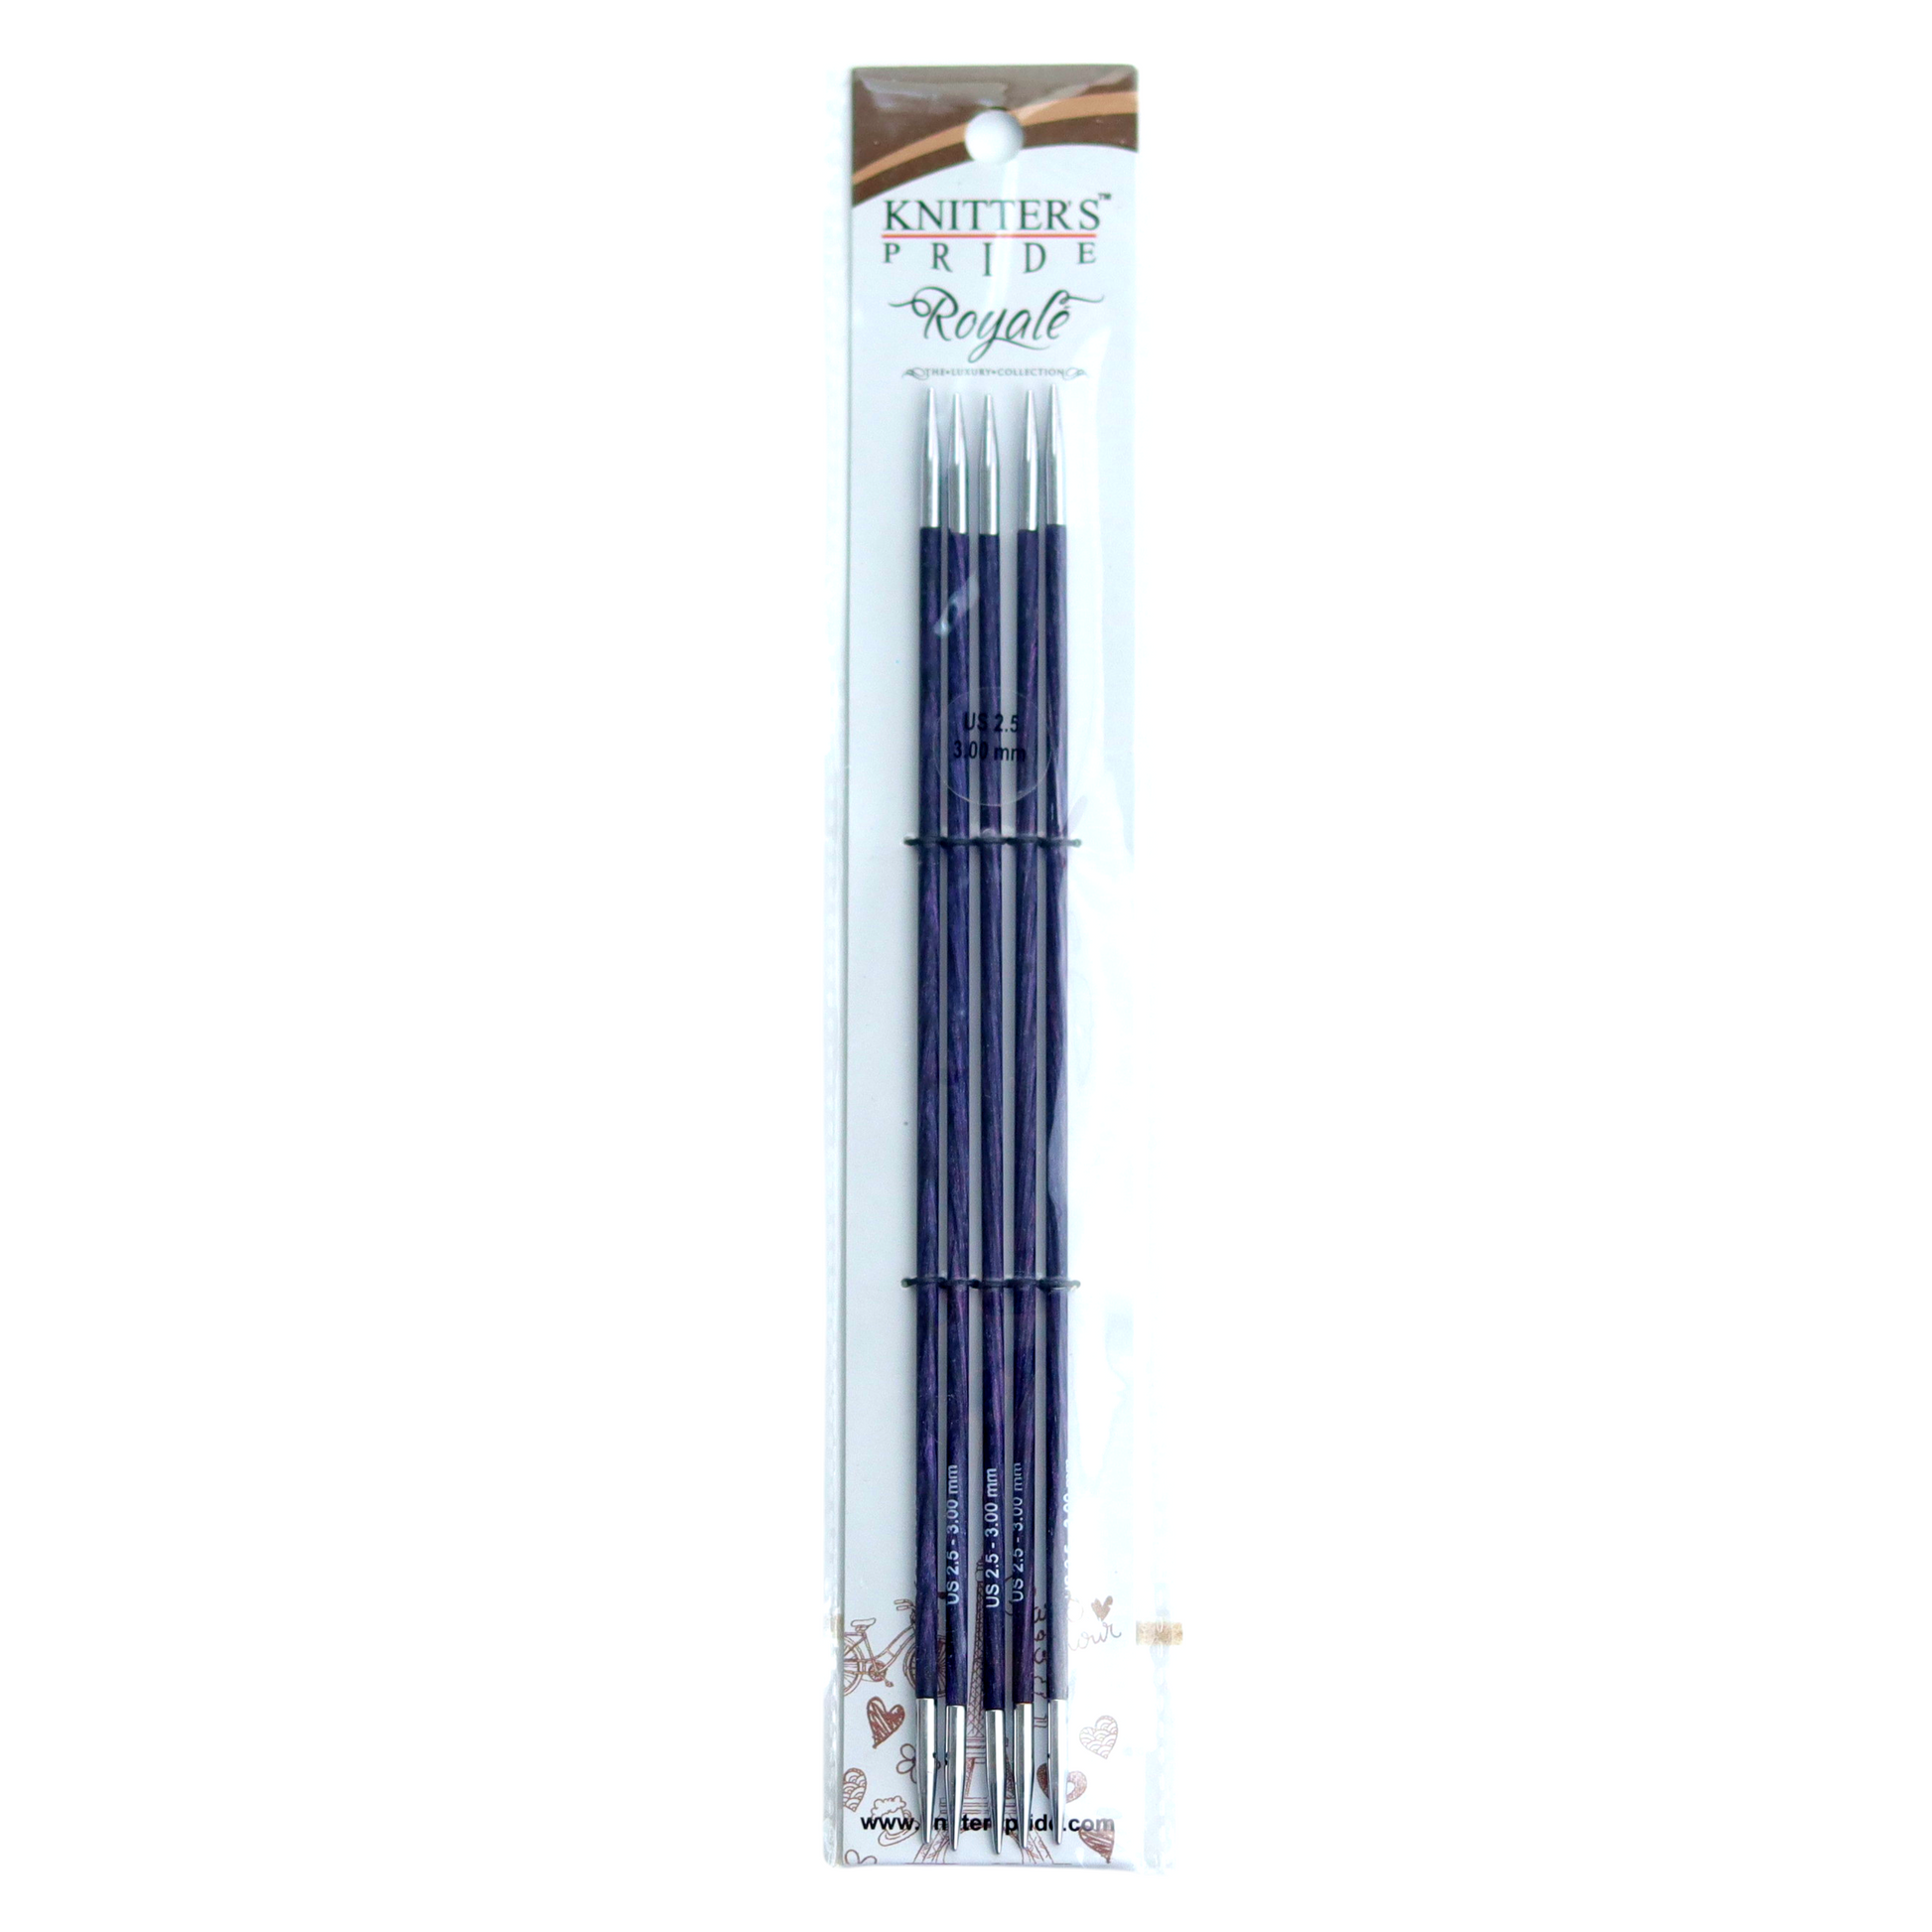 Knitter's Pride-Royale Double Pointed Needles 8-Size 2.5/3mm